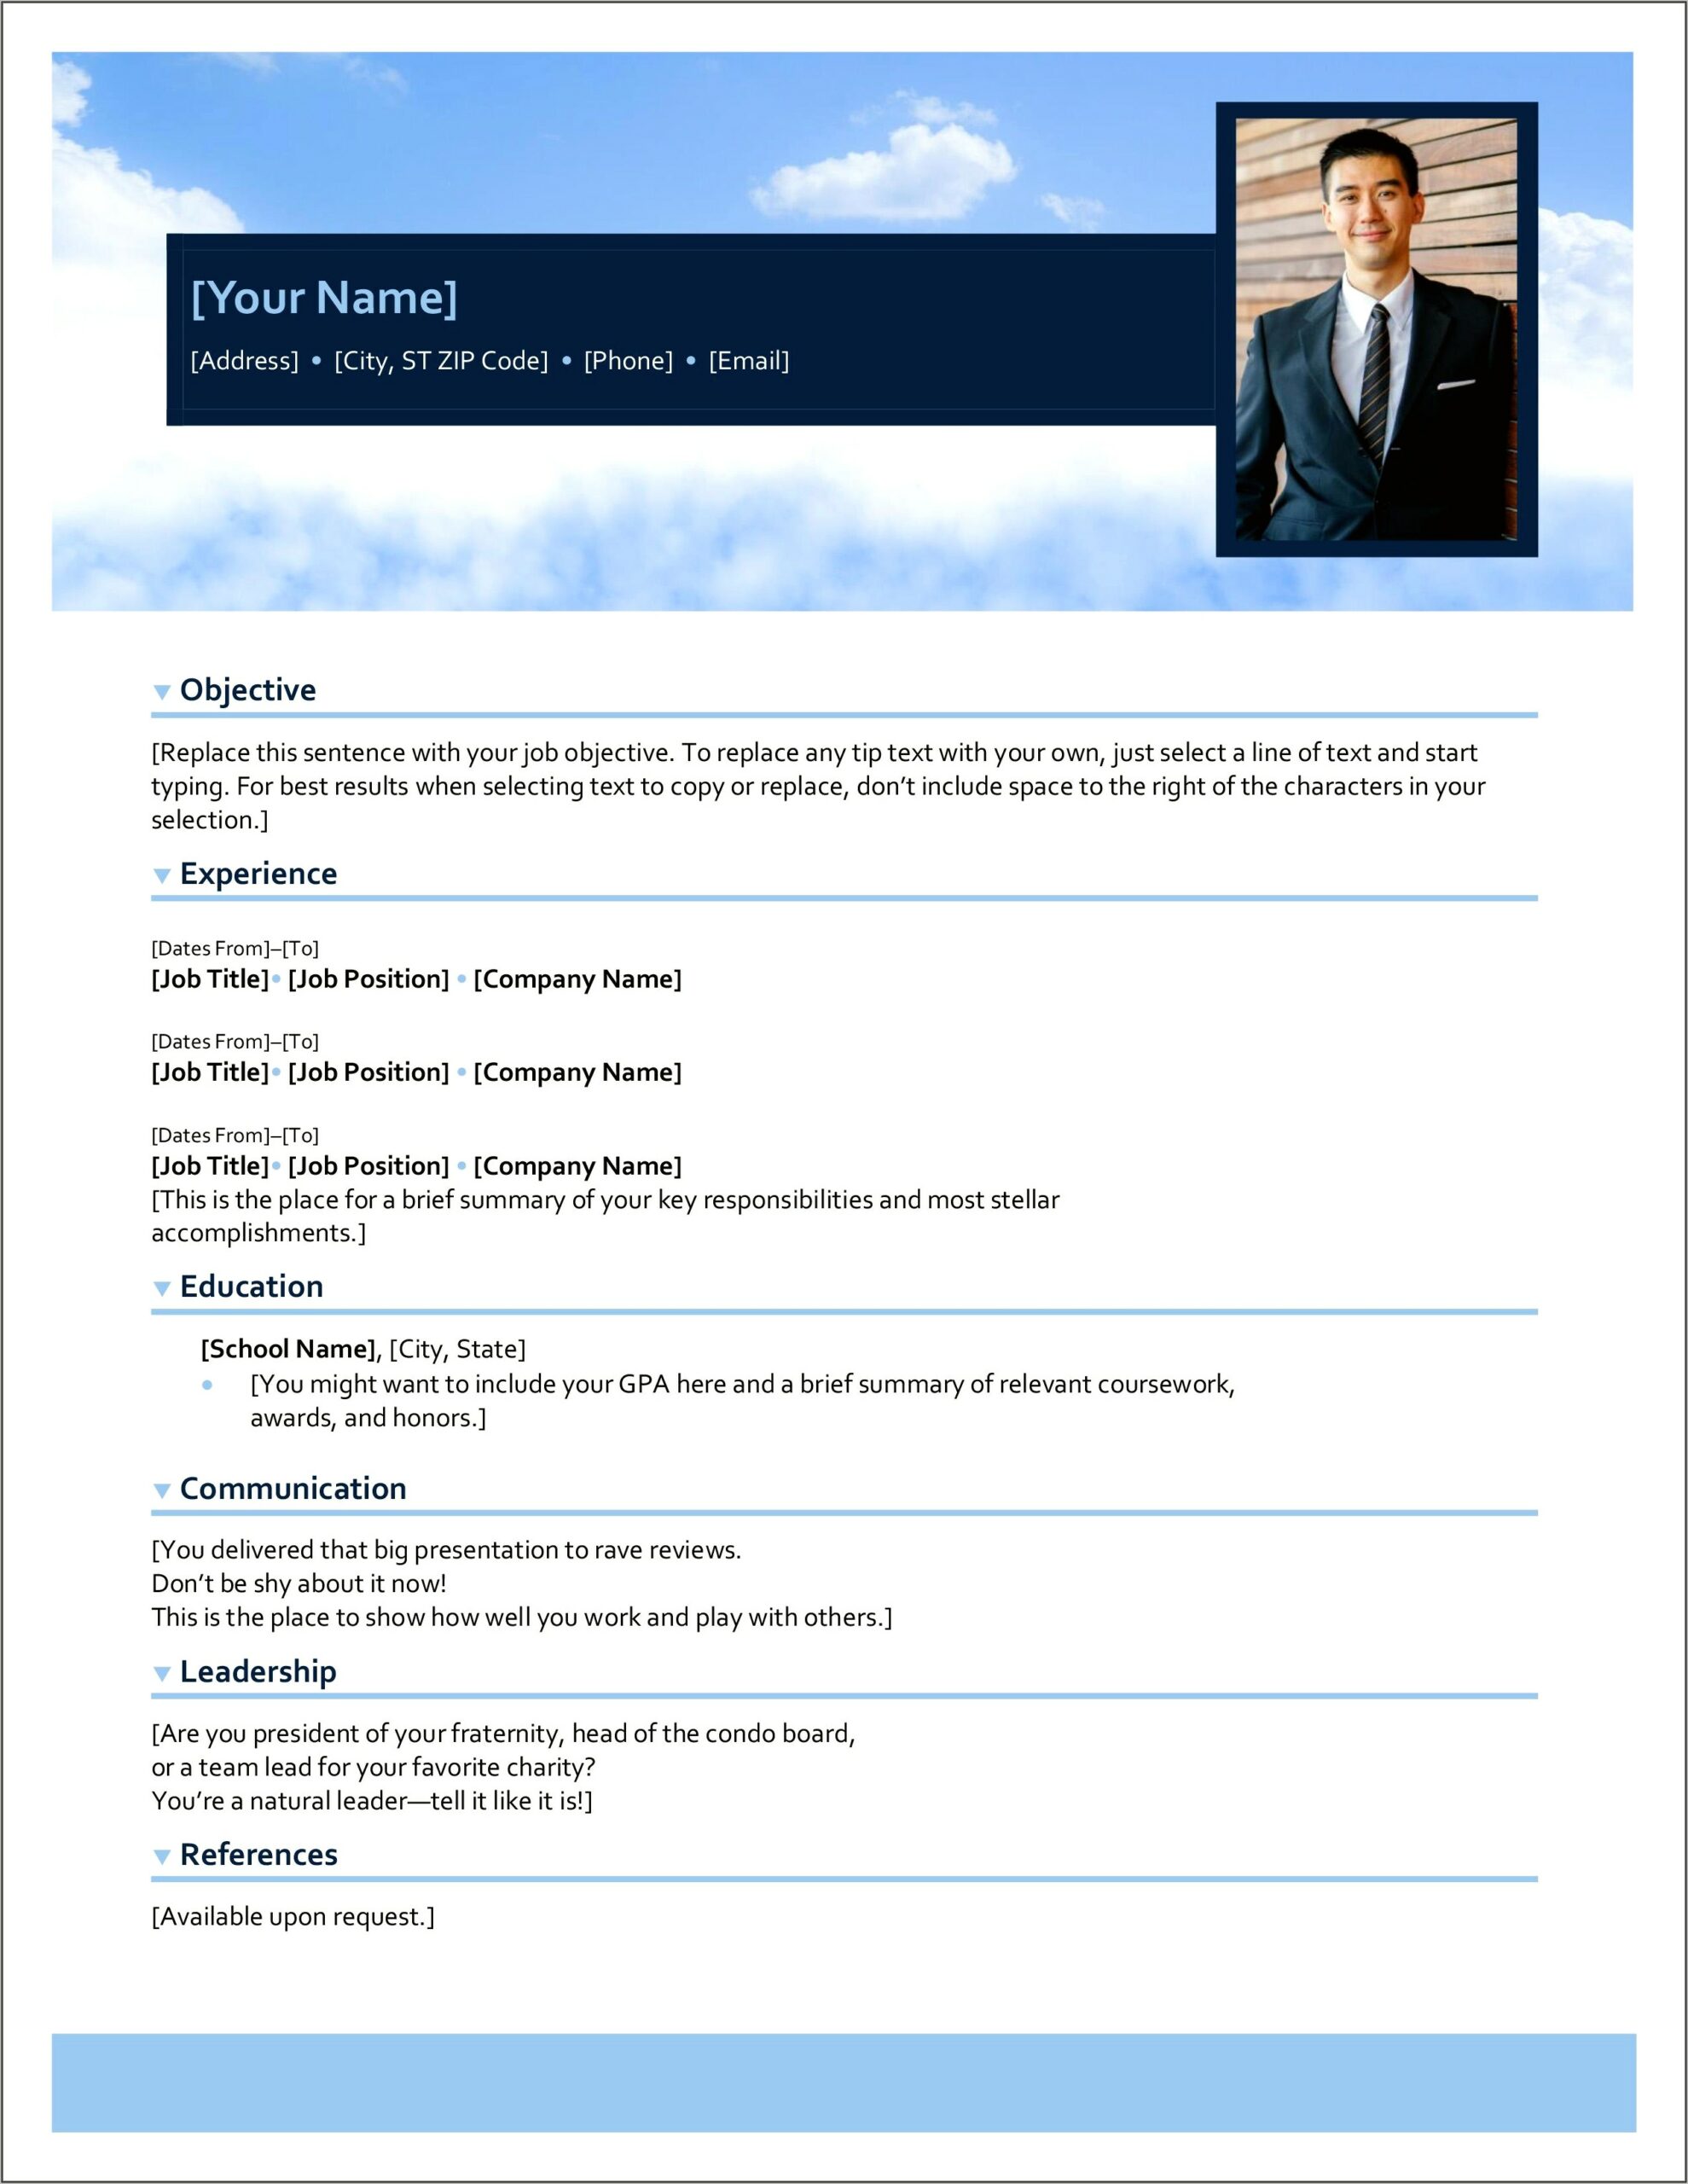 Resume Format For Job Interview In Word